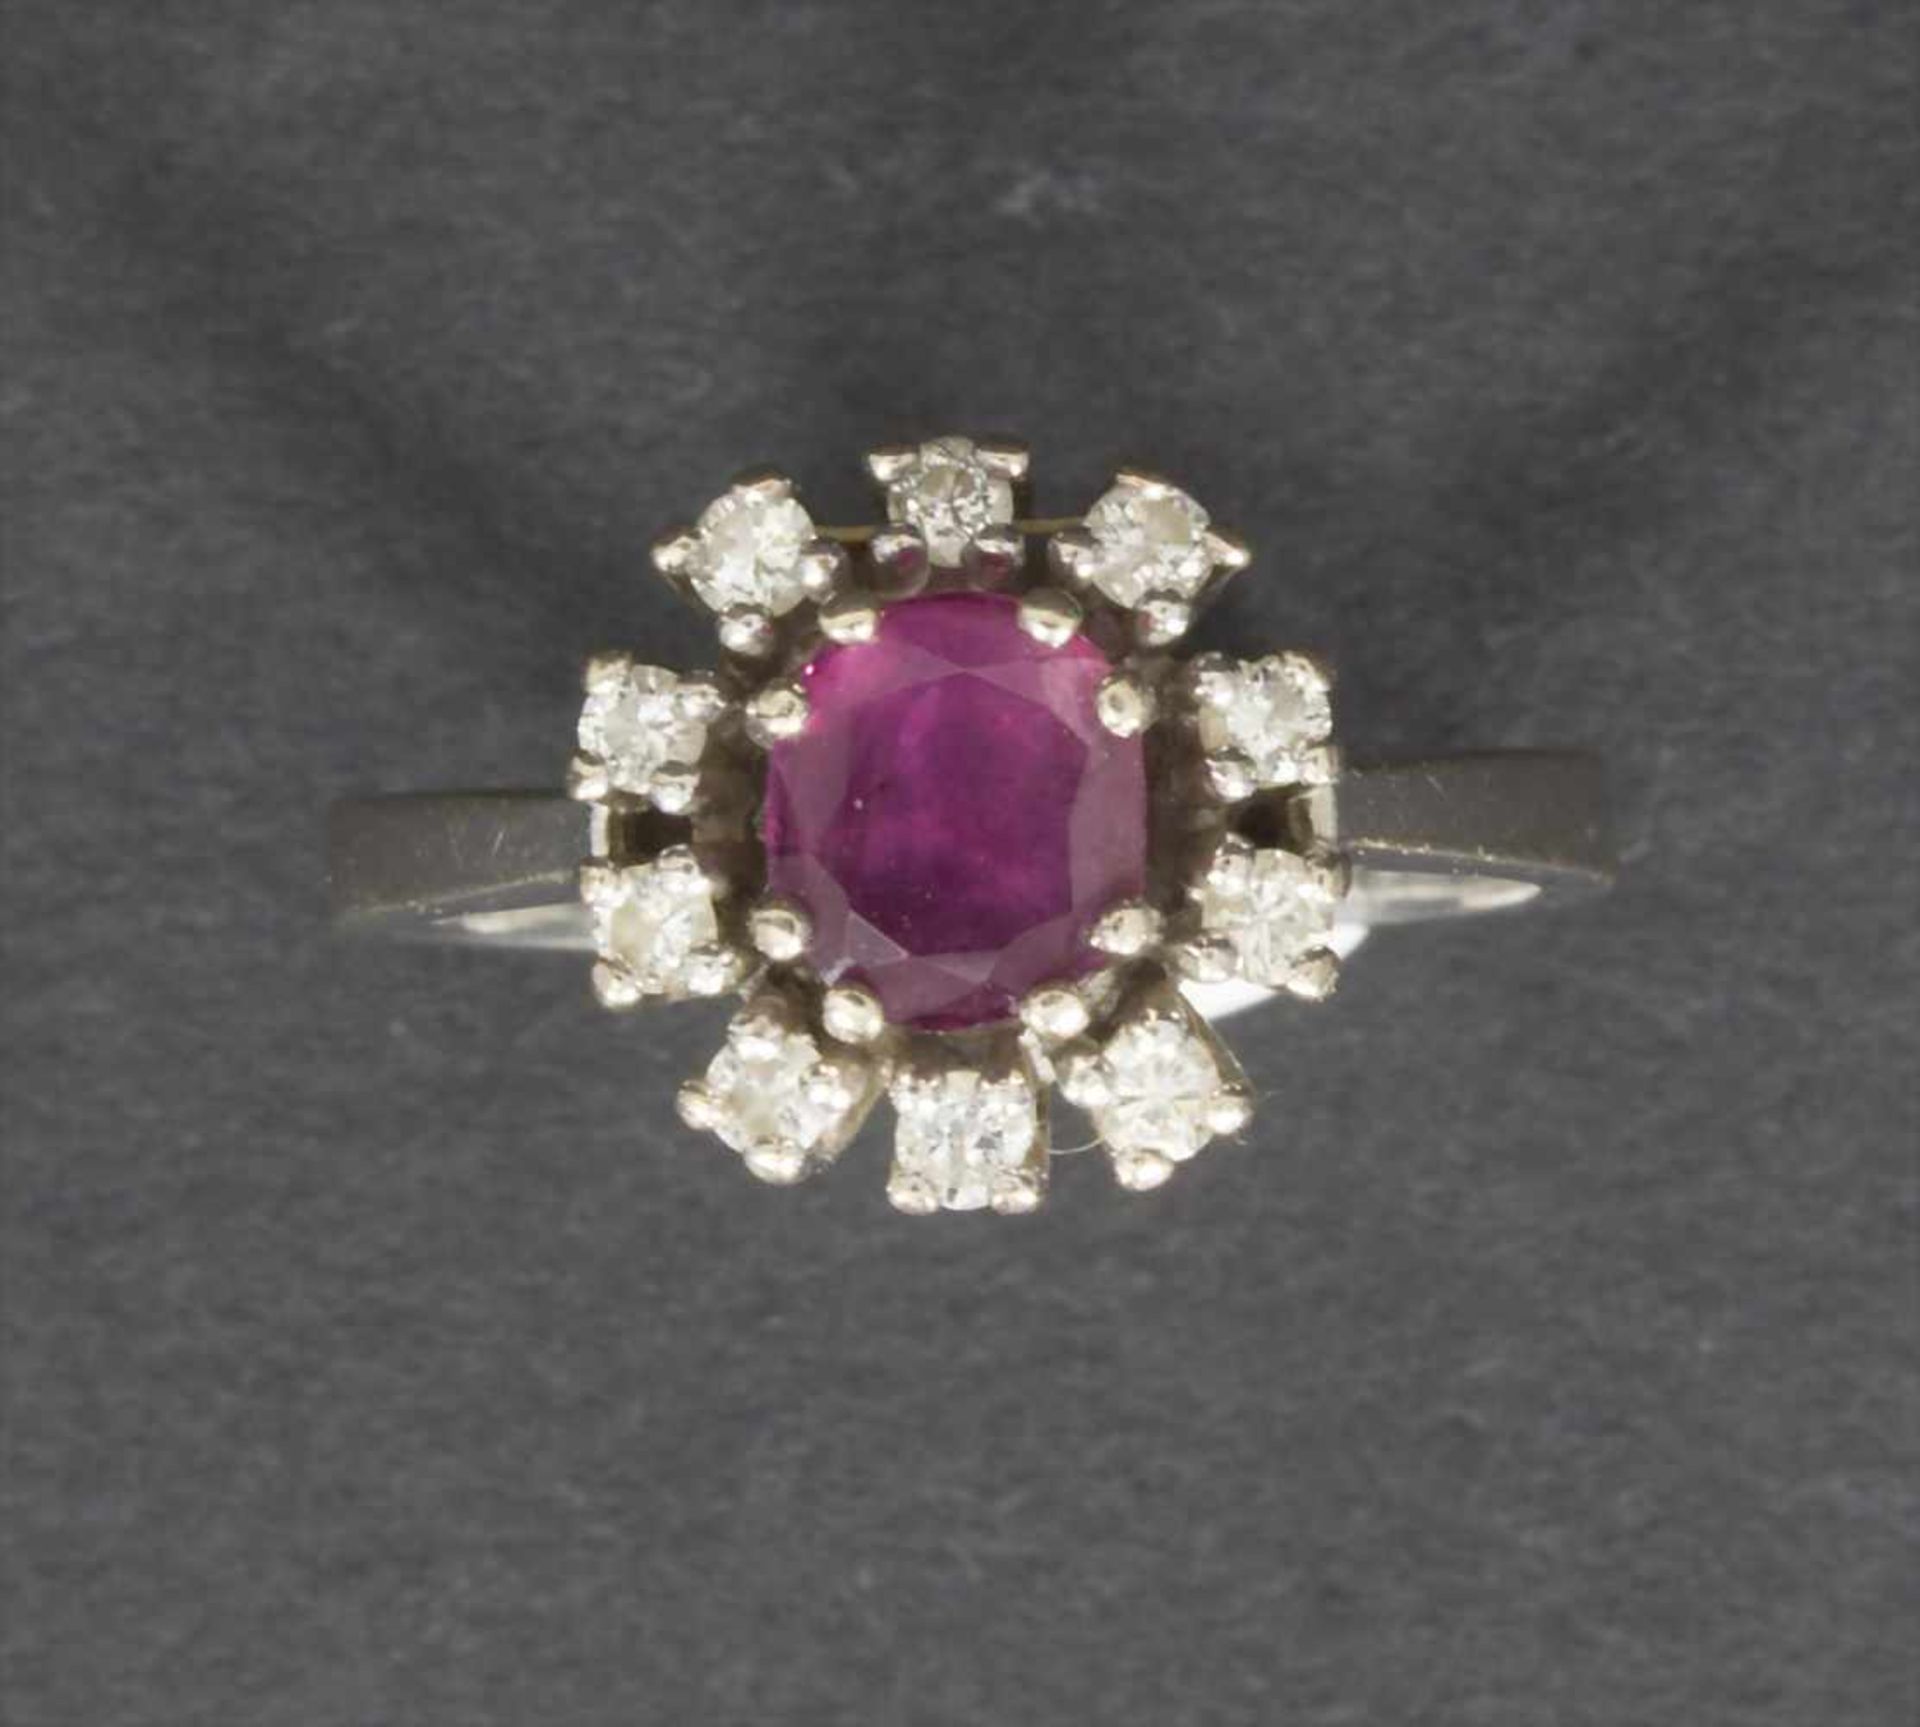 Damenring mit Diamanten und Rubin / A ladies ring with diamonds and red rubyMaterial: WG 585/000,